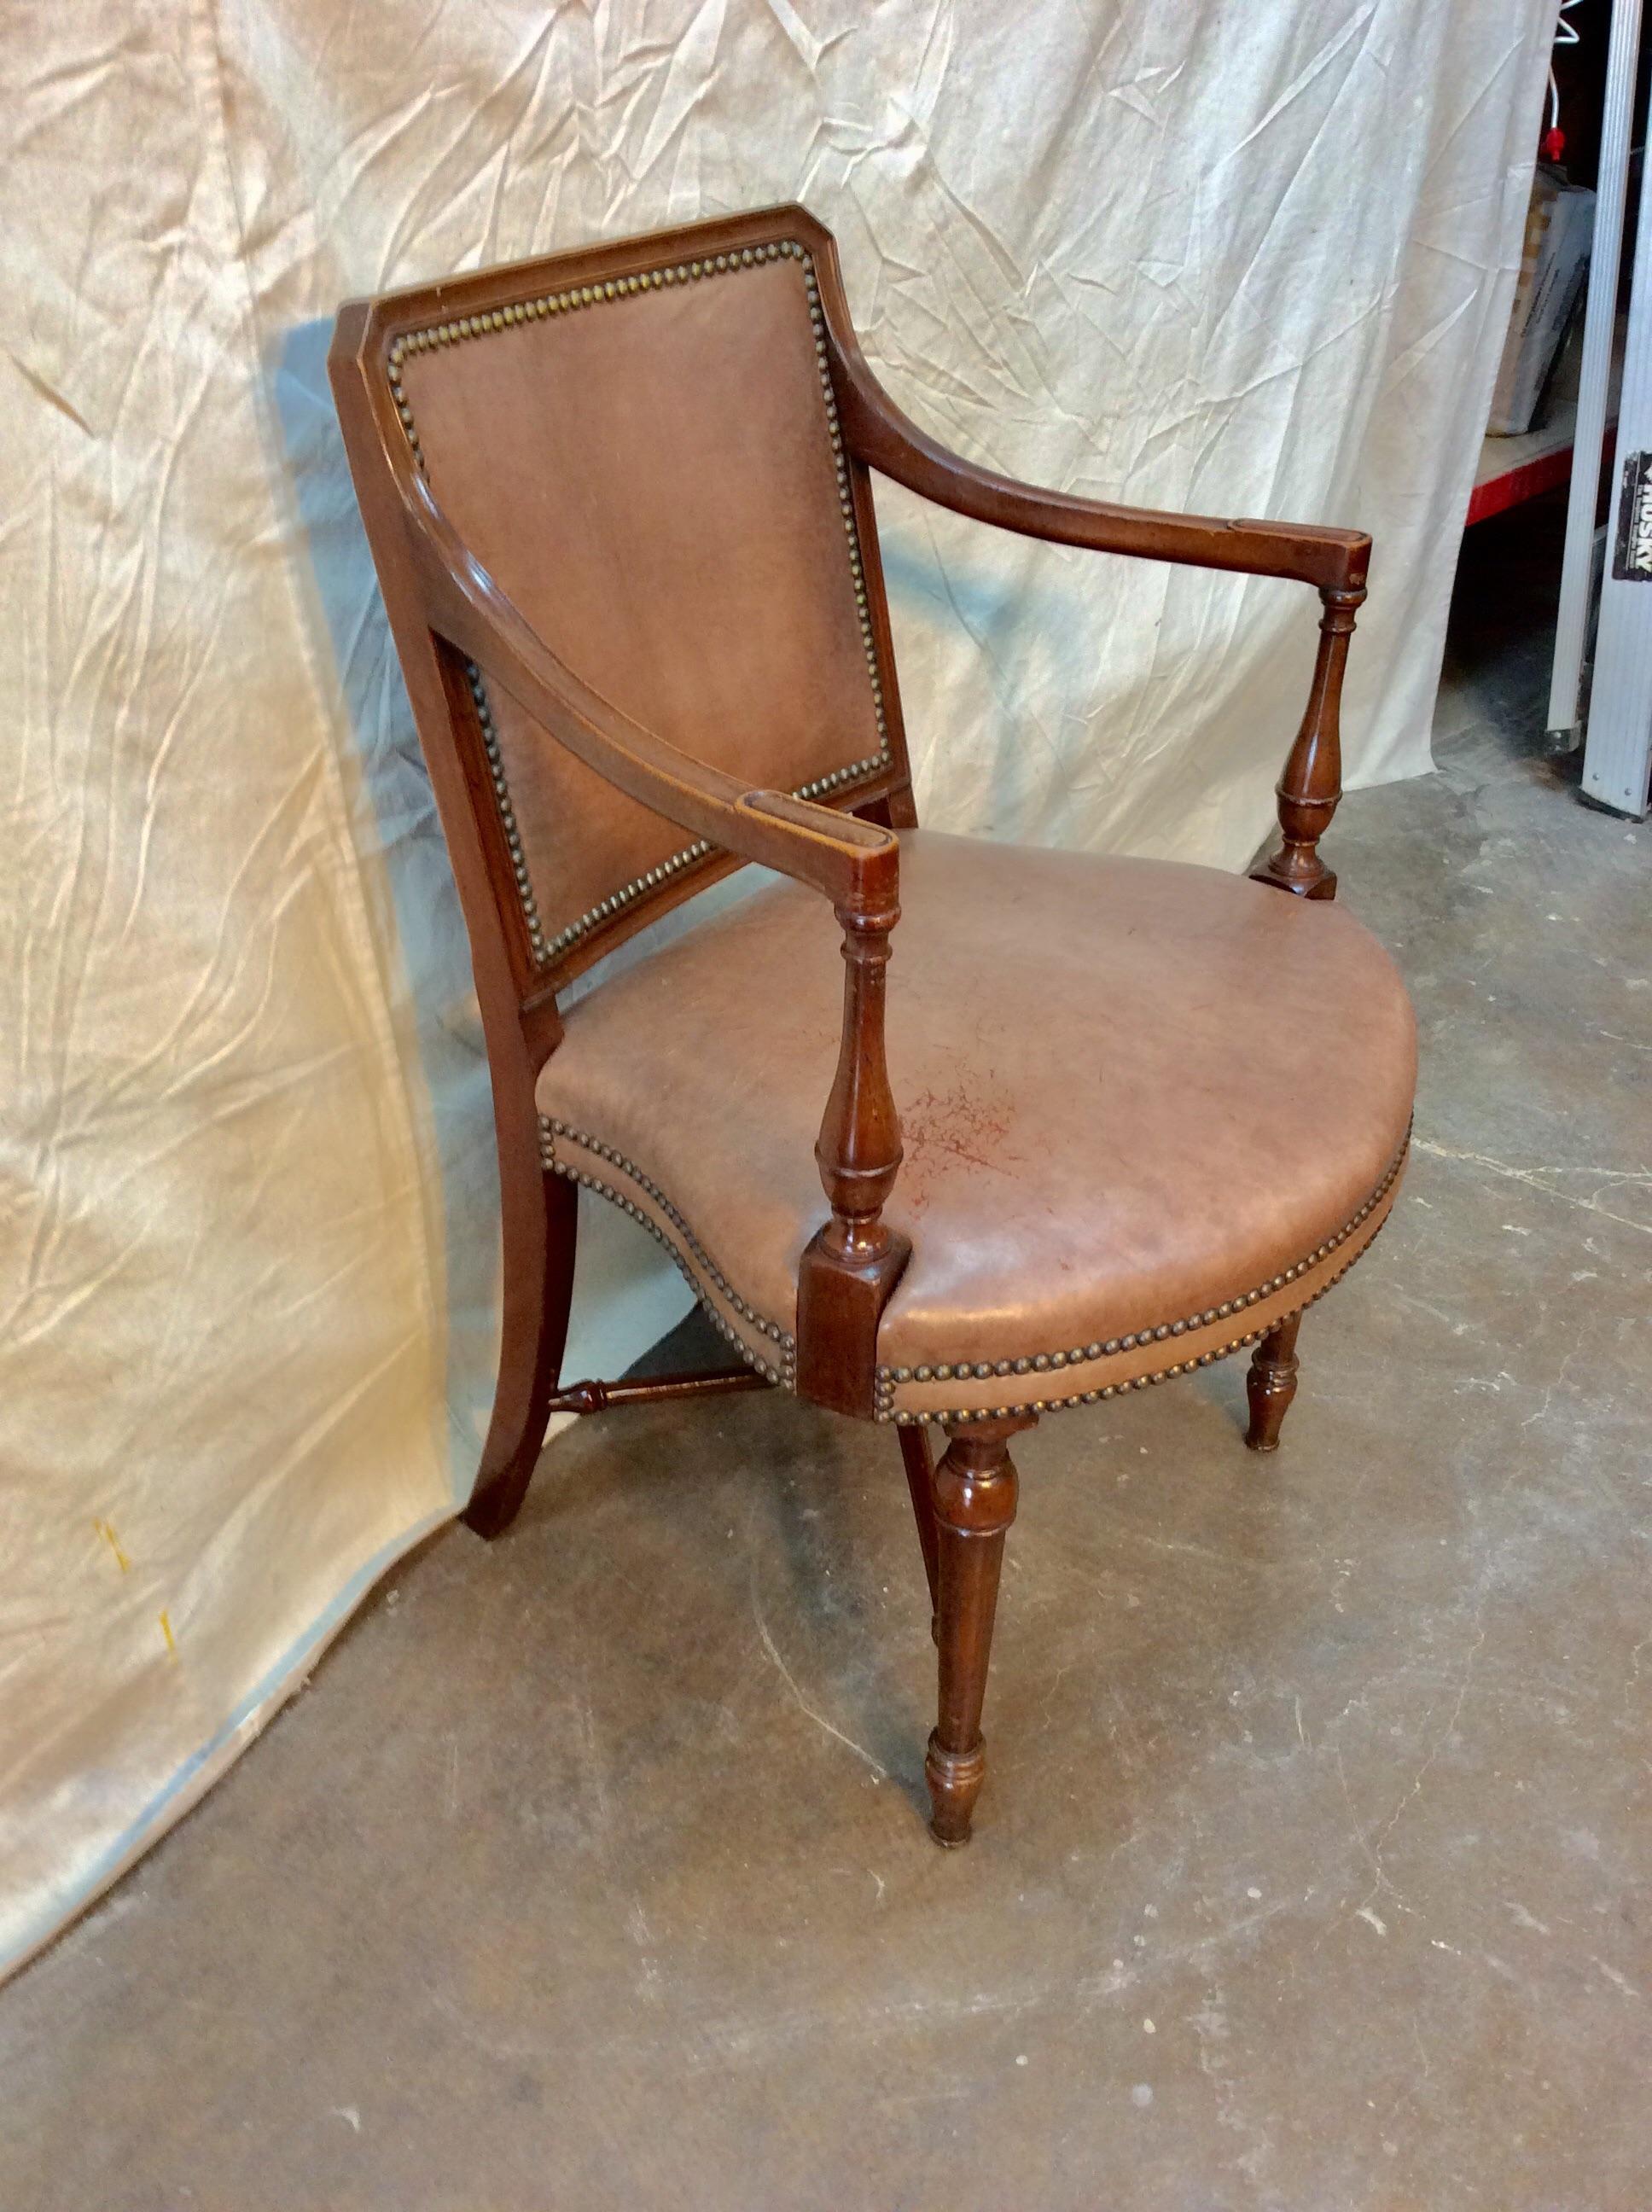 Presented as found, this Early 20th century French Armchair features a walnut wood frame and soft tan leather upholstery. Brass nailheads accent the rounded seat as well as the front and back of the chair. Resting on four legs with a double crossbar